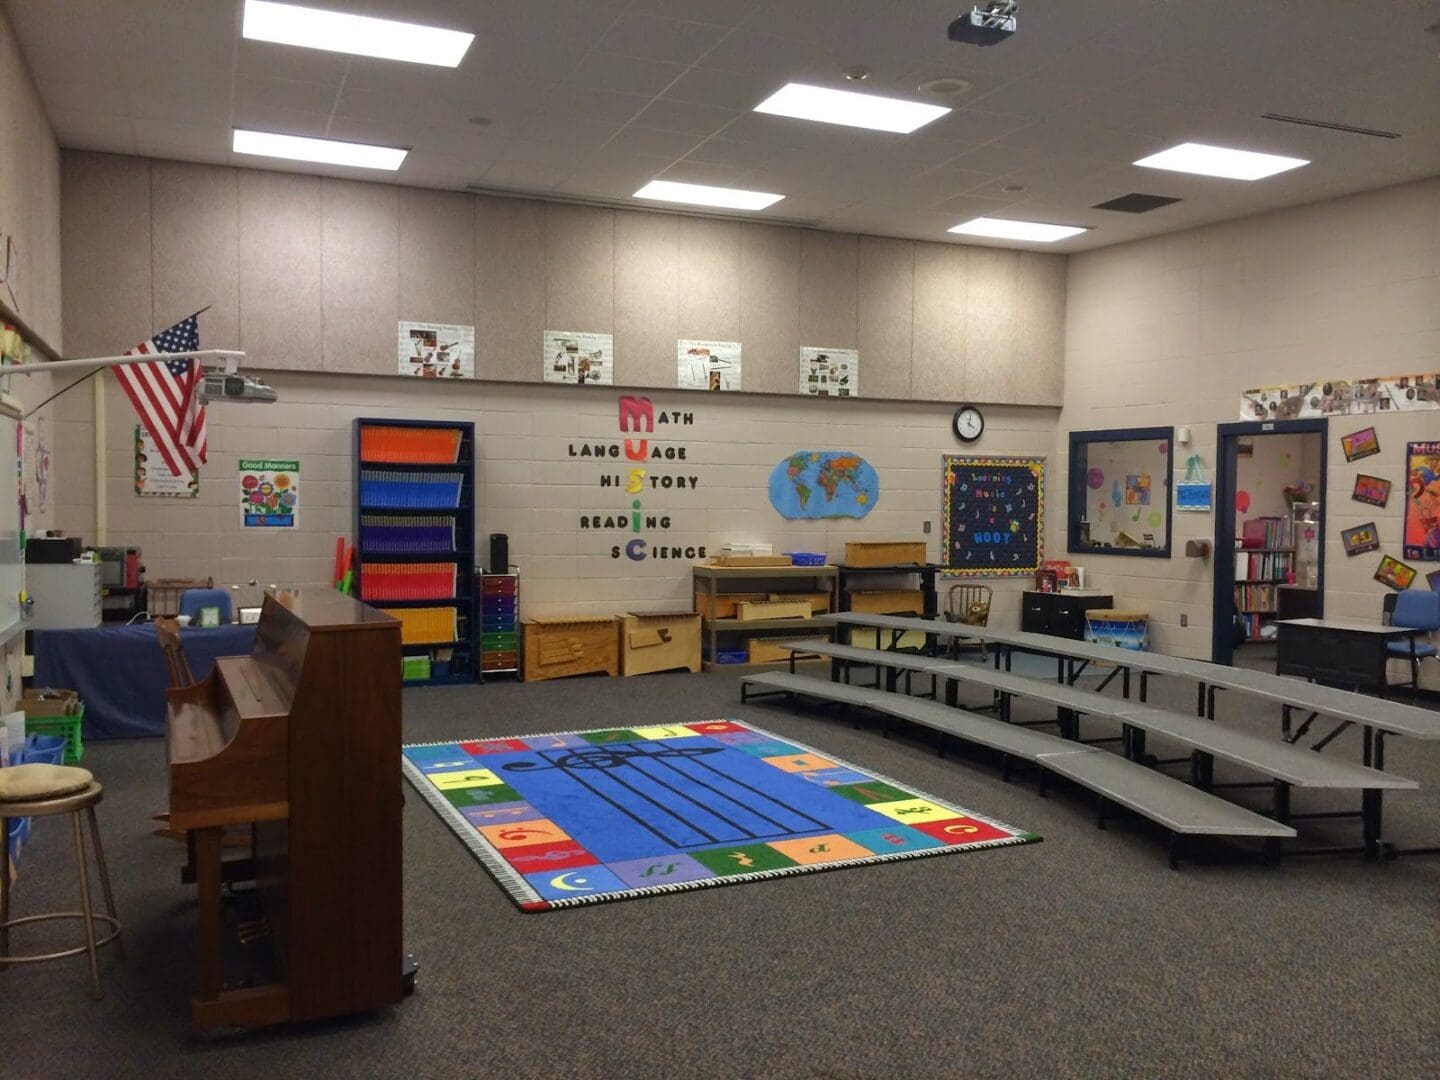 A classroom with many steps and a rug.